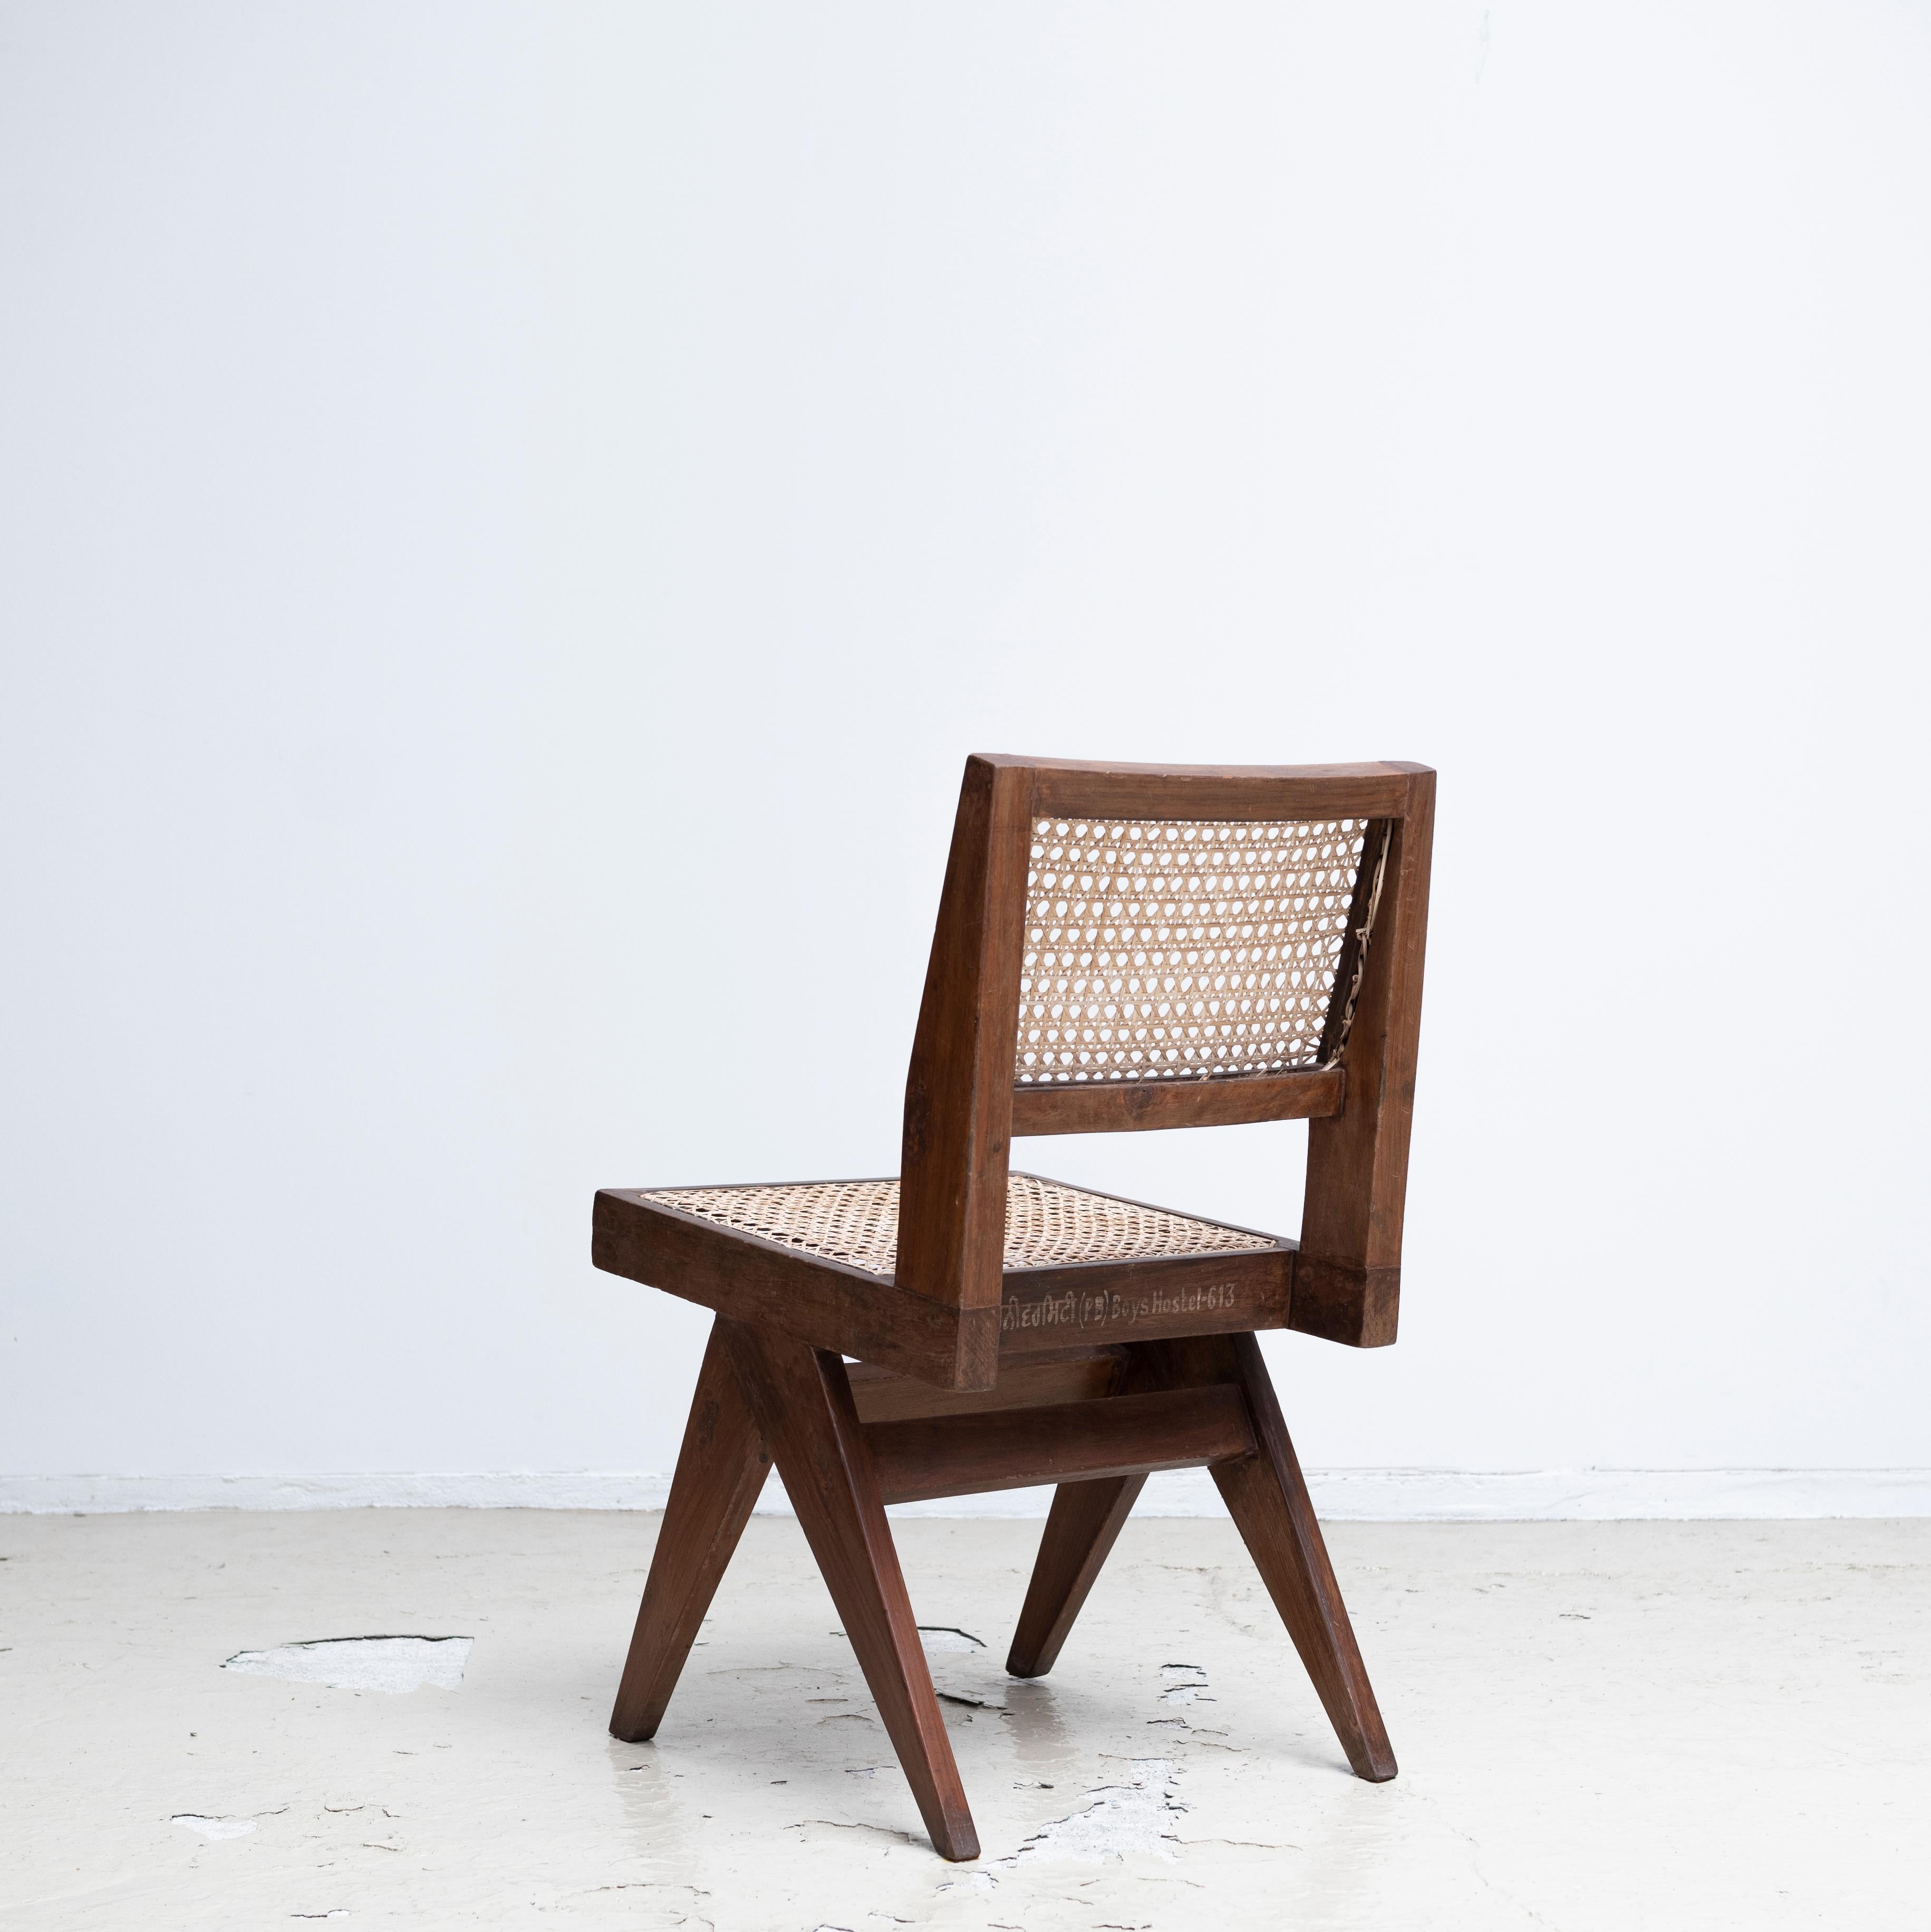 Mid-20th Century Pierre Jeanneret Armless Dining Chairs, Pair, circa 1950s, Chandigarh, India